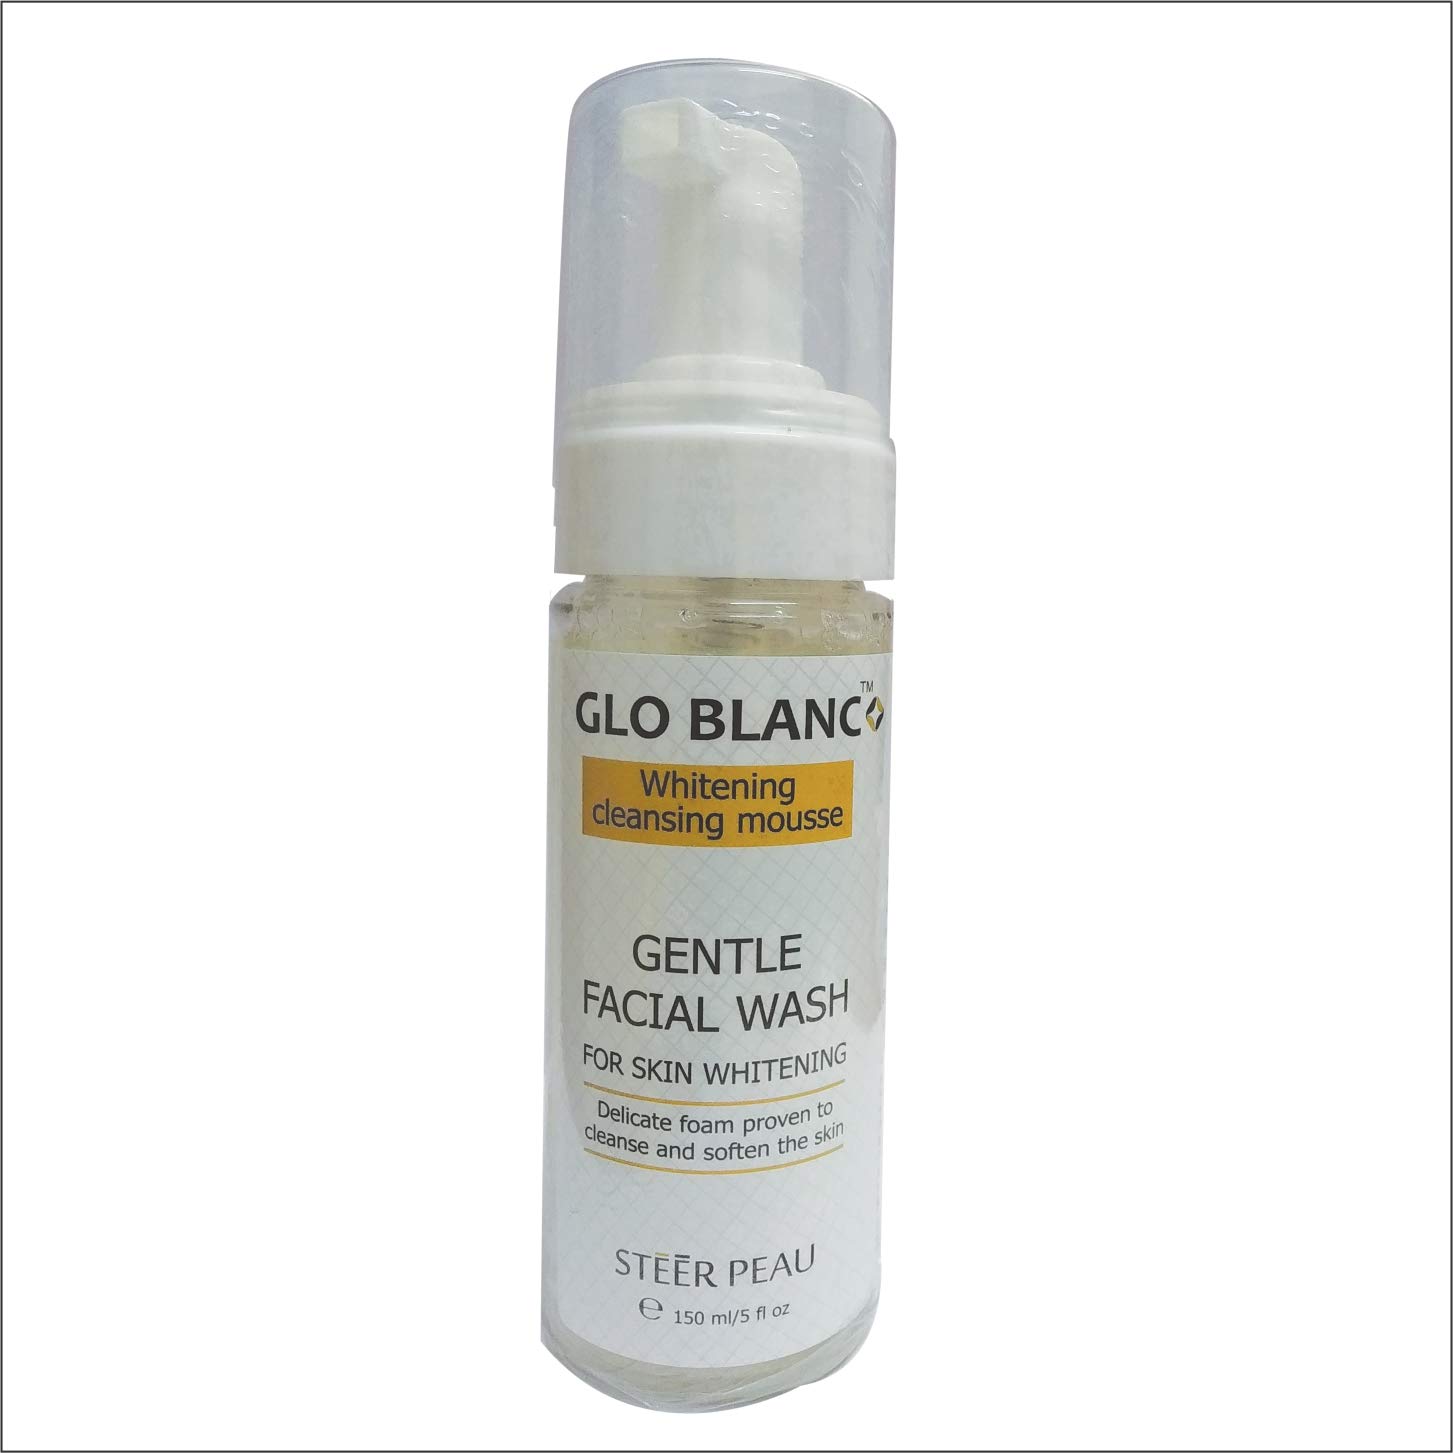 Glo Blanc Whitening Cleansing Mousse